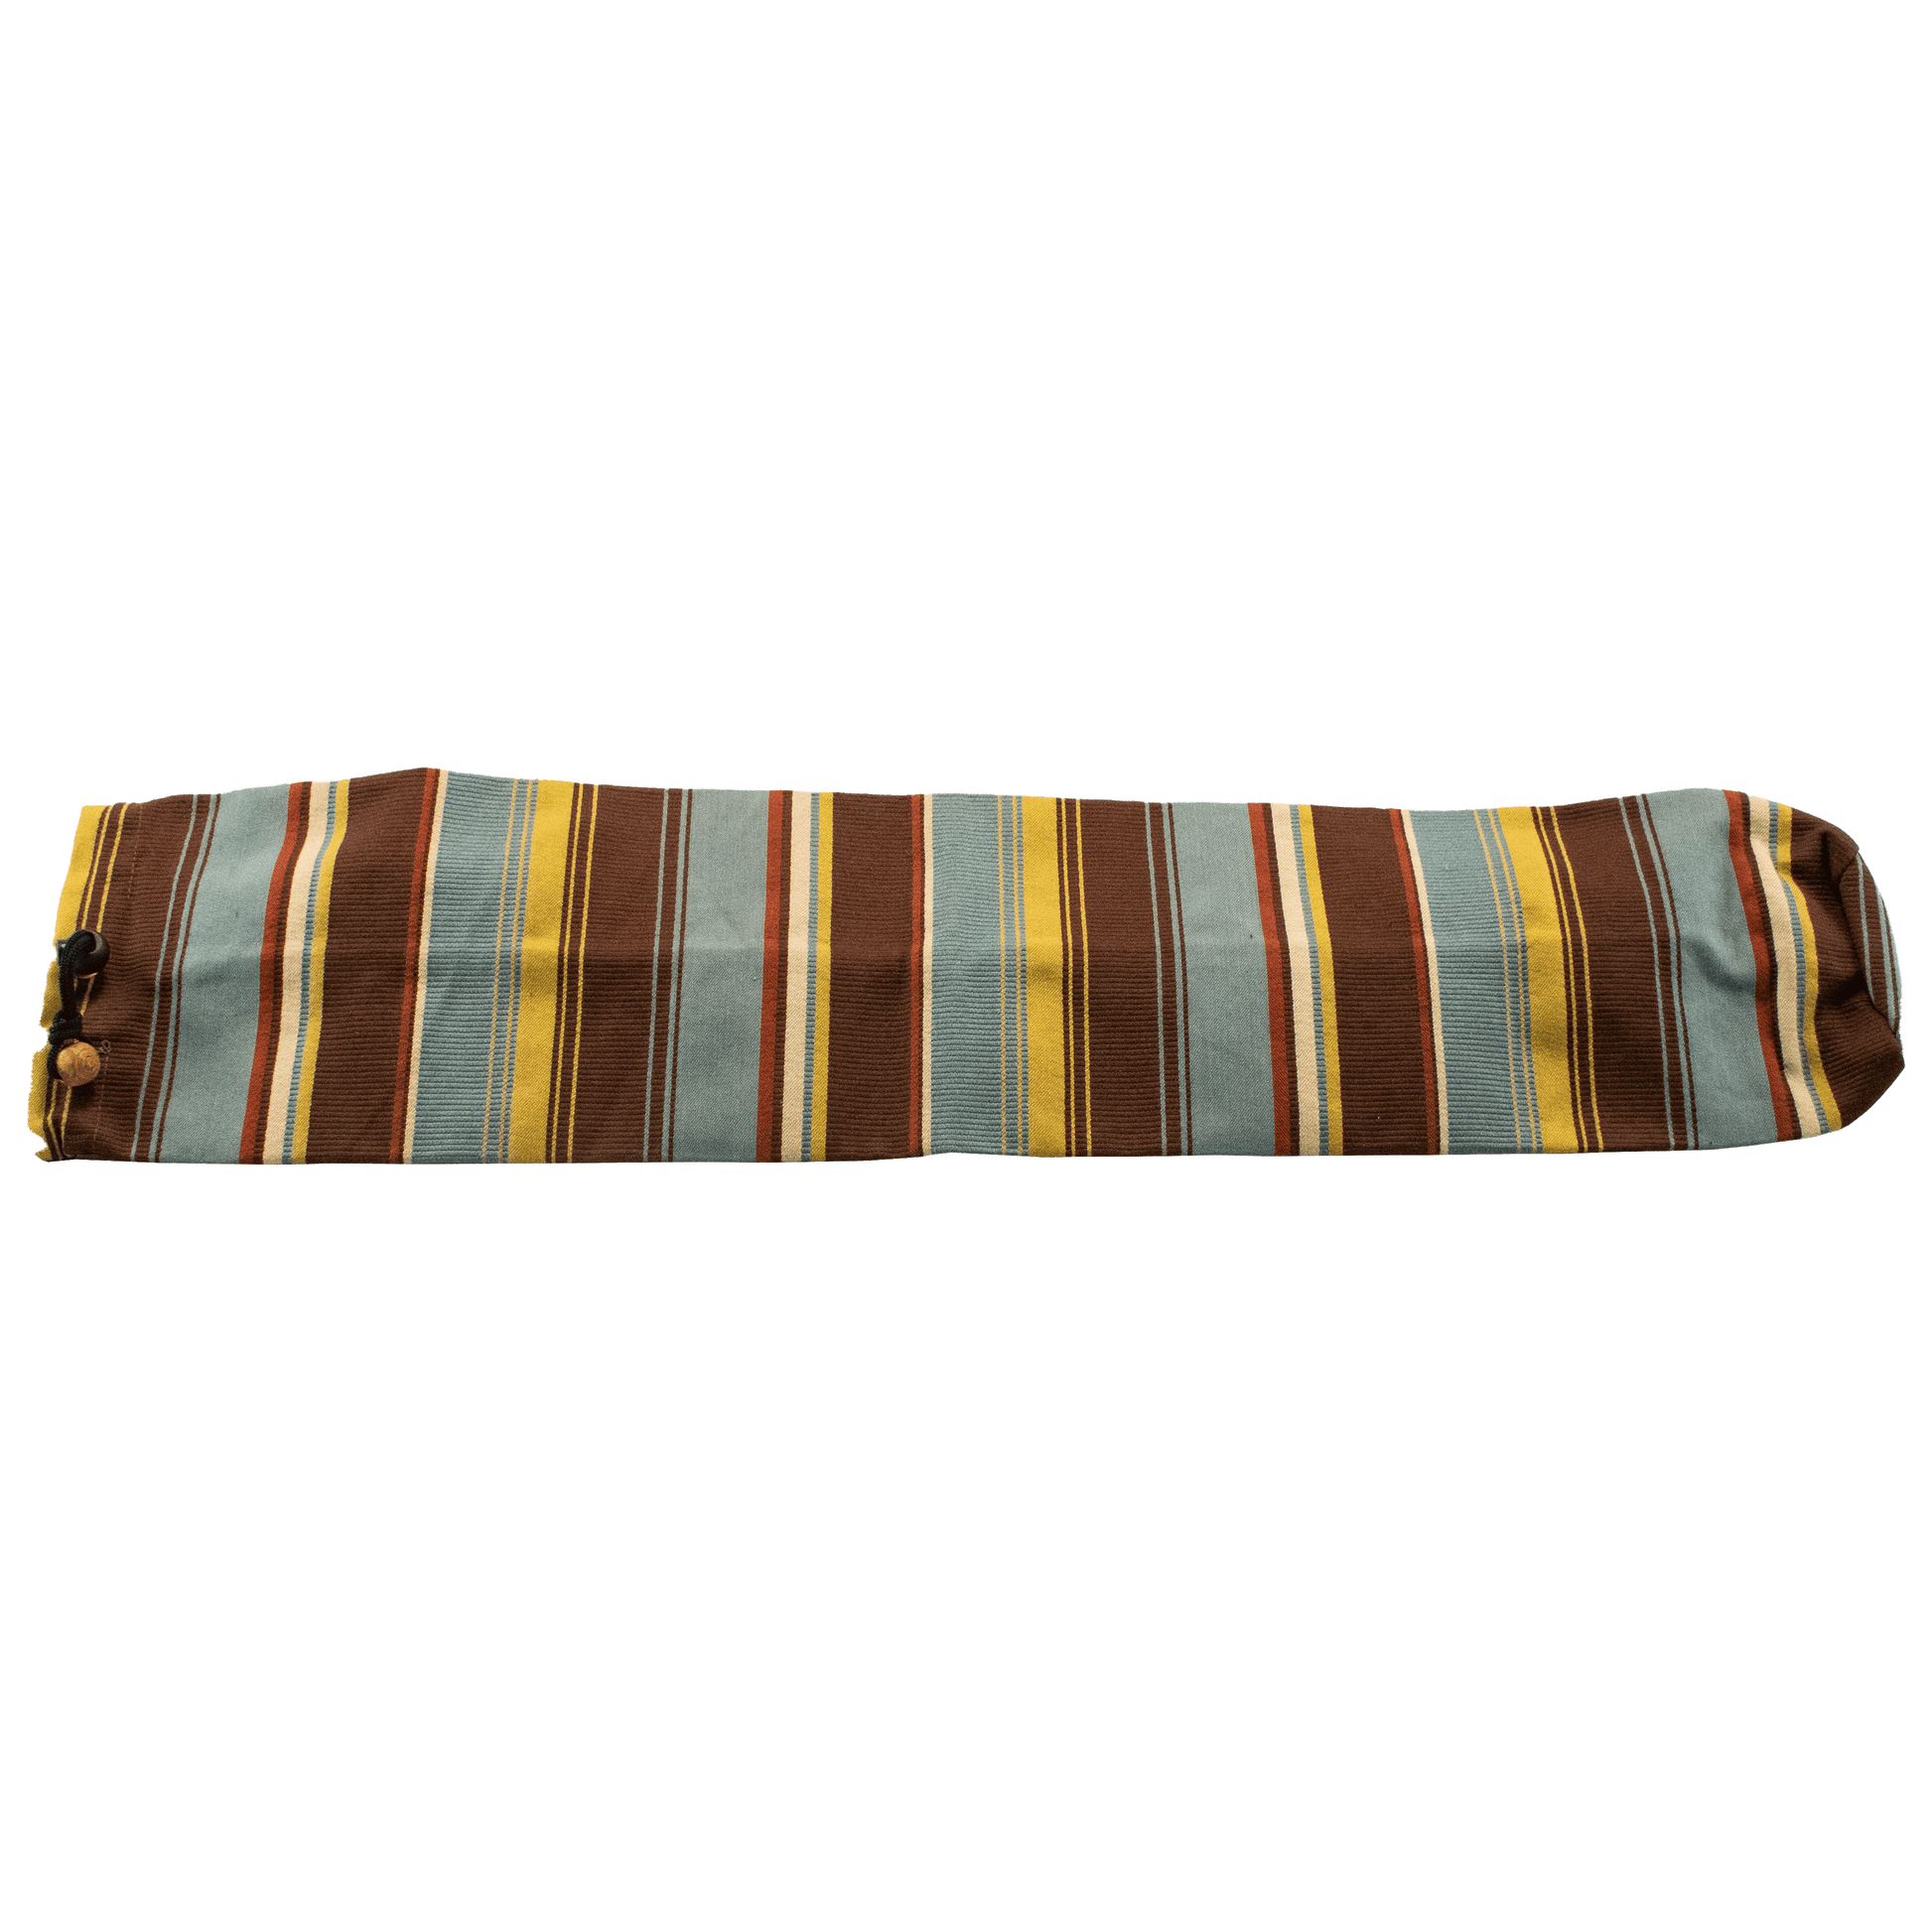 29 Inch shofar bag with brown yellow terracotta blue and off-white stripes